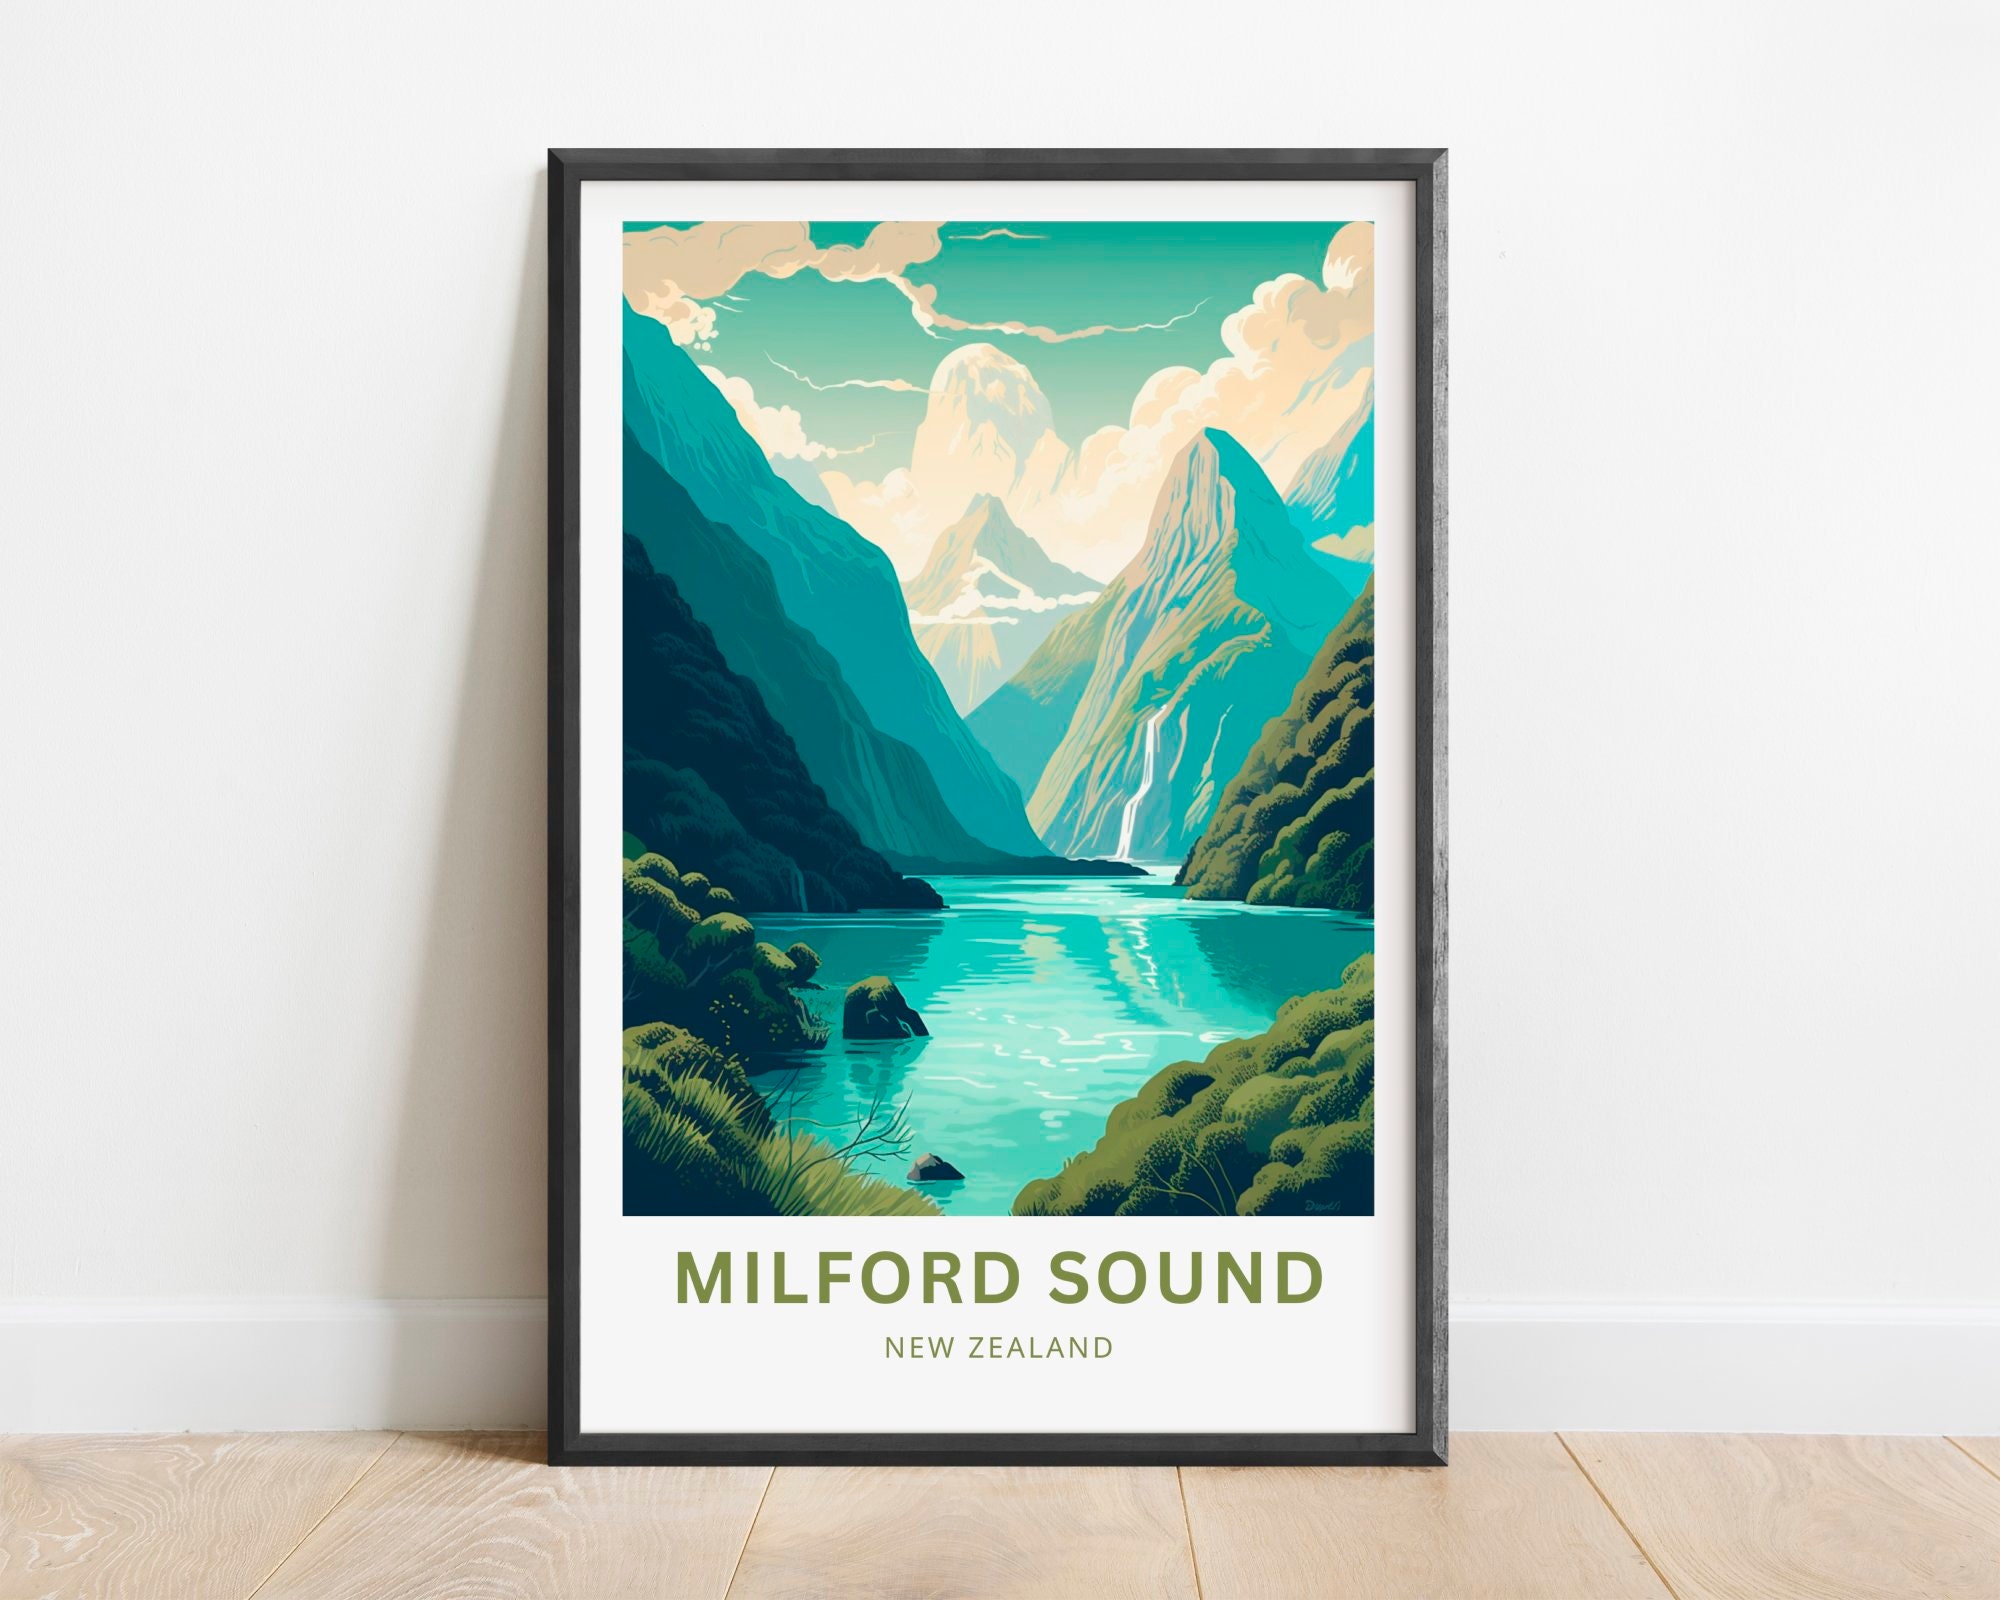 New Poster, Milford Framed Zealand Milford Present Travel New Gift Zealand Sound Sound Print Etsy Present, - Art, Wall